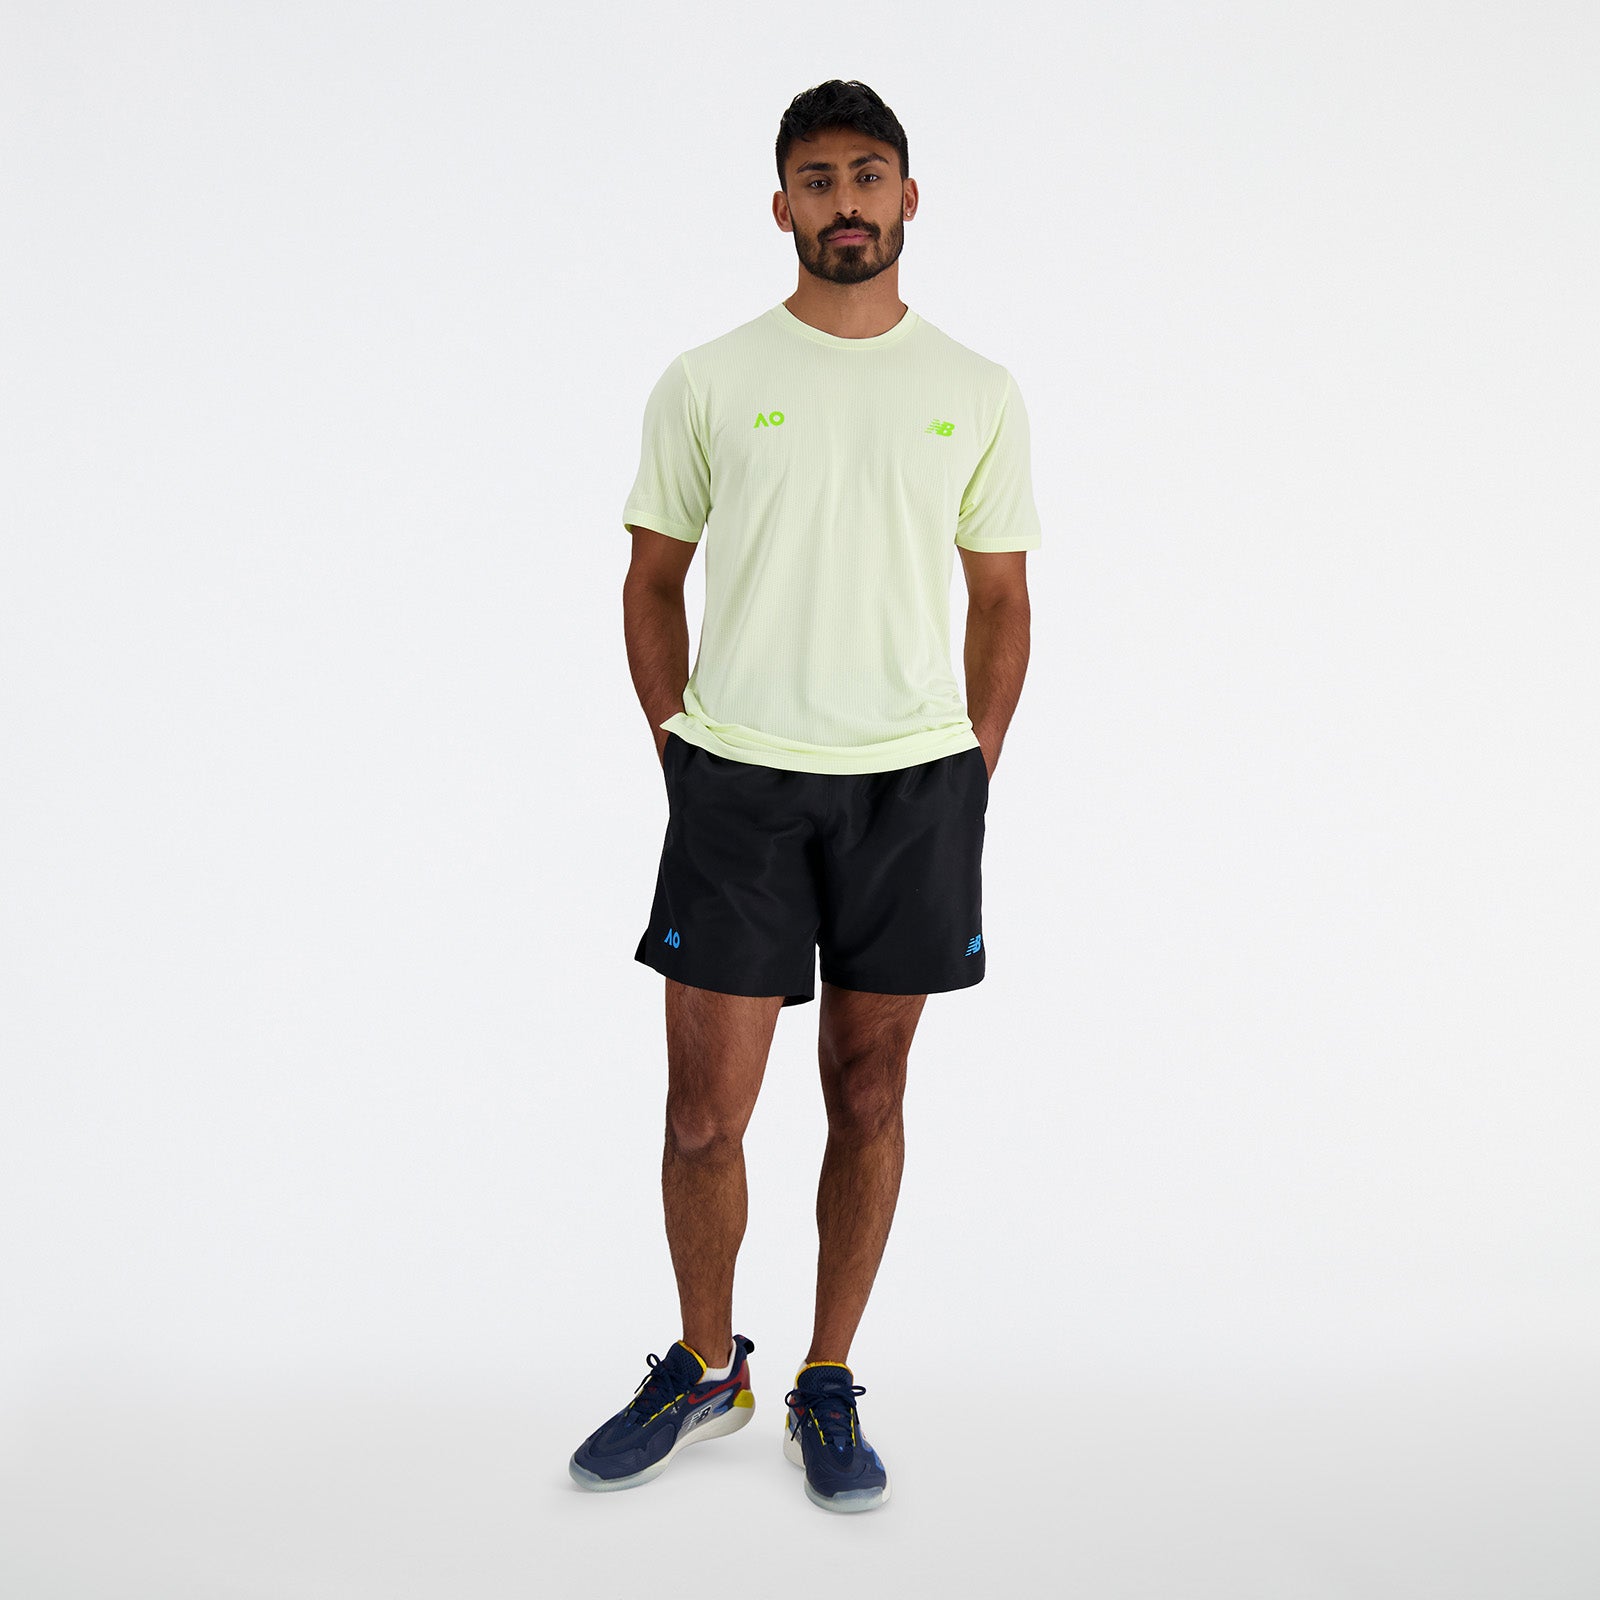 Cool & Comfy Men's Athletic T-Shirt by New Balance